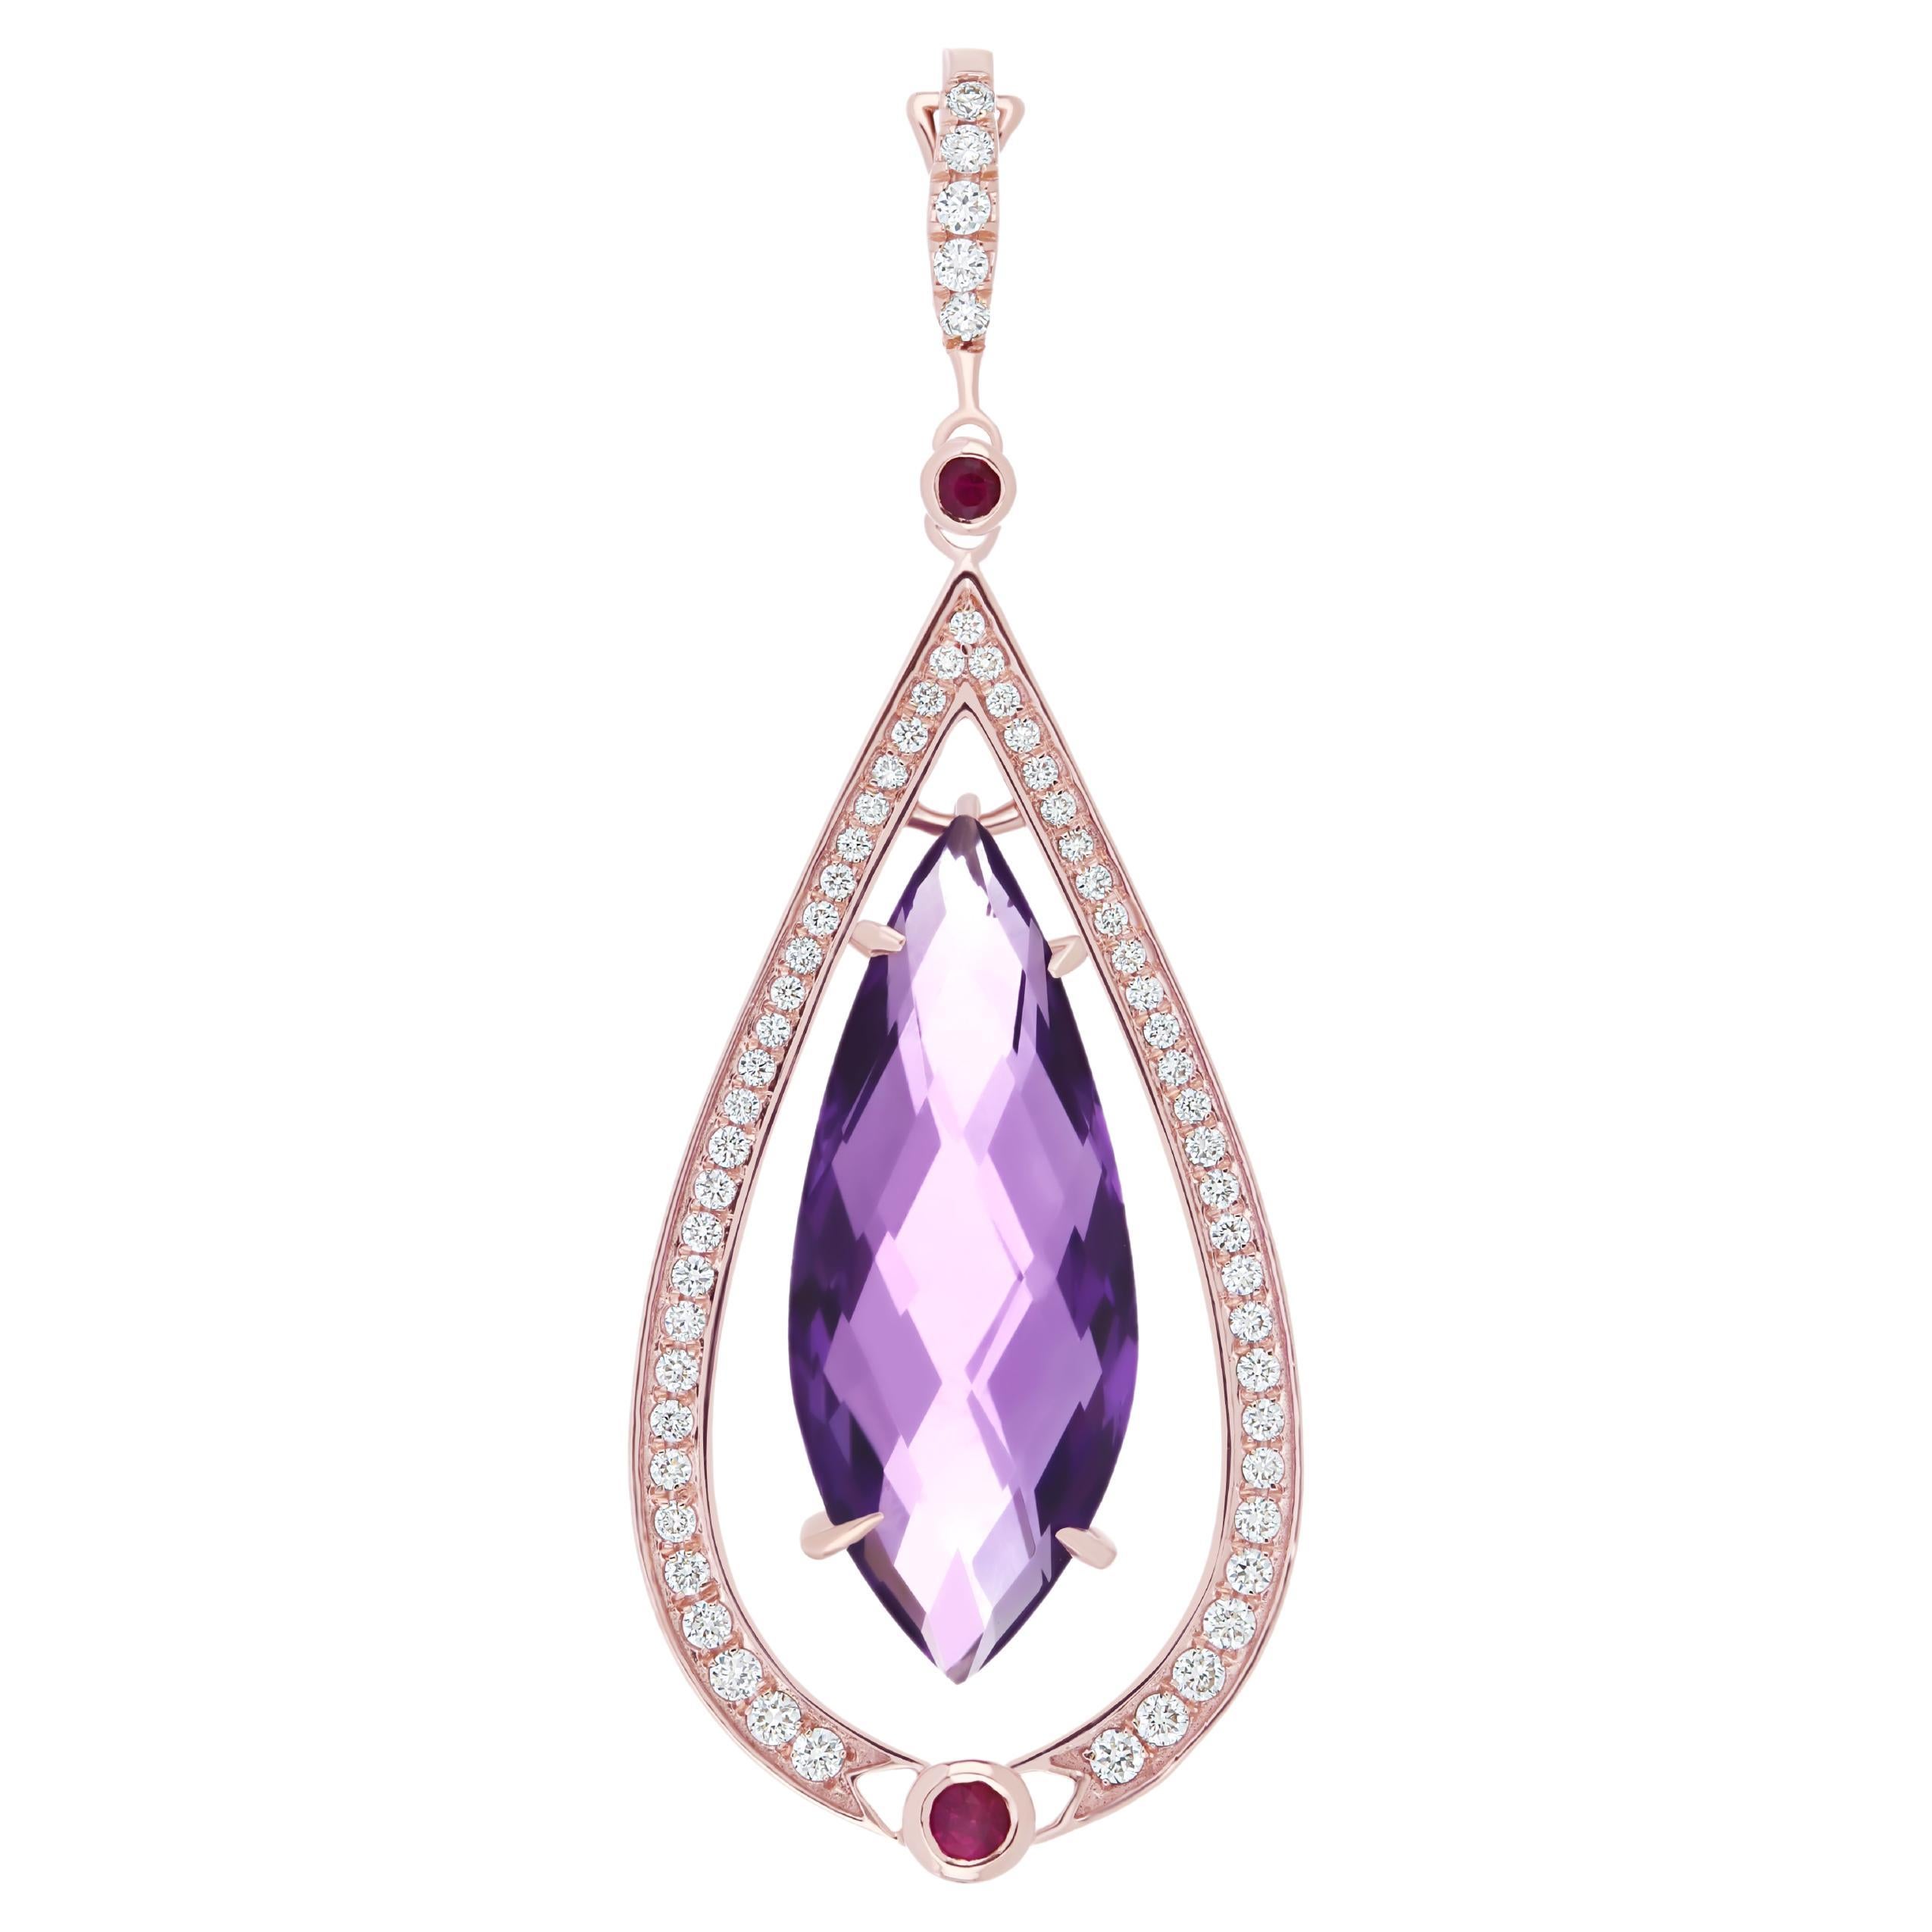 5.15Cts Amethyst, Ruby & Diamond Pendant in 14K Rose Gold Handmade jewelry  For Sale